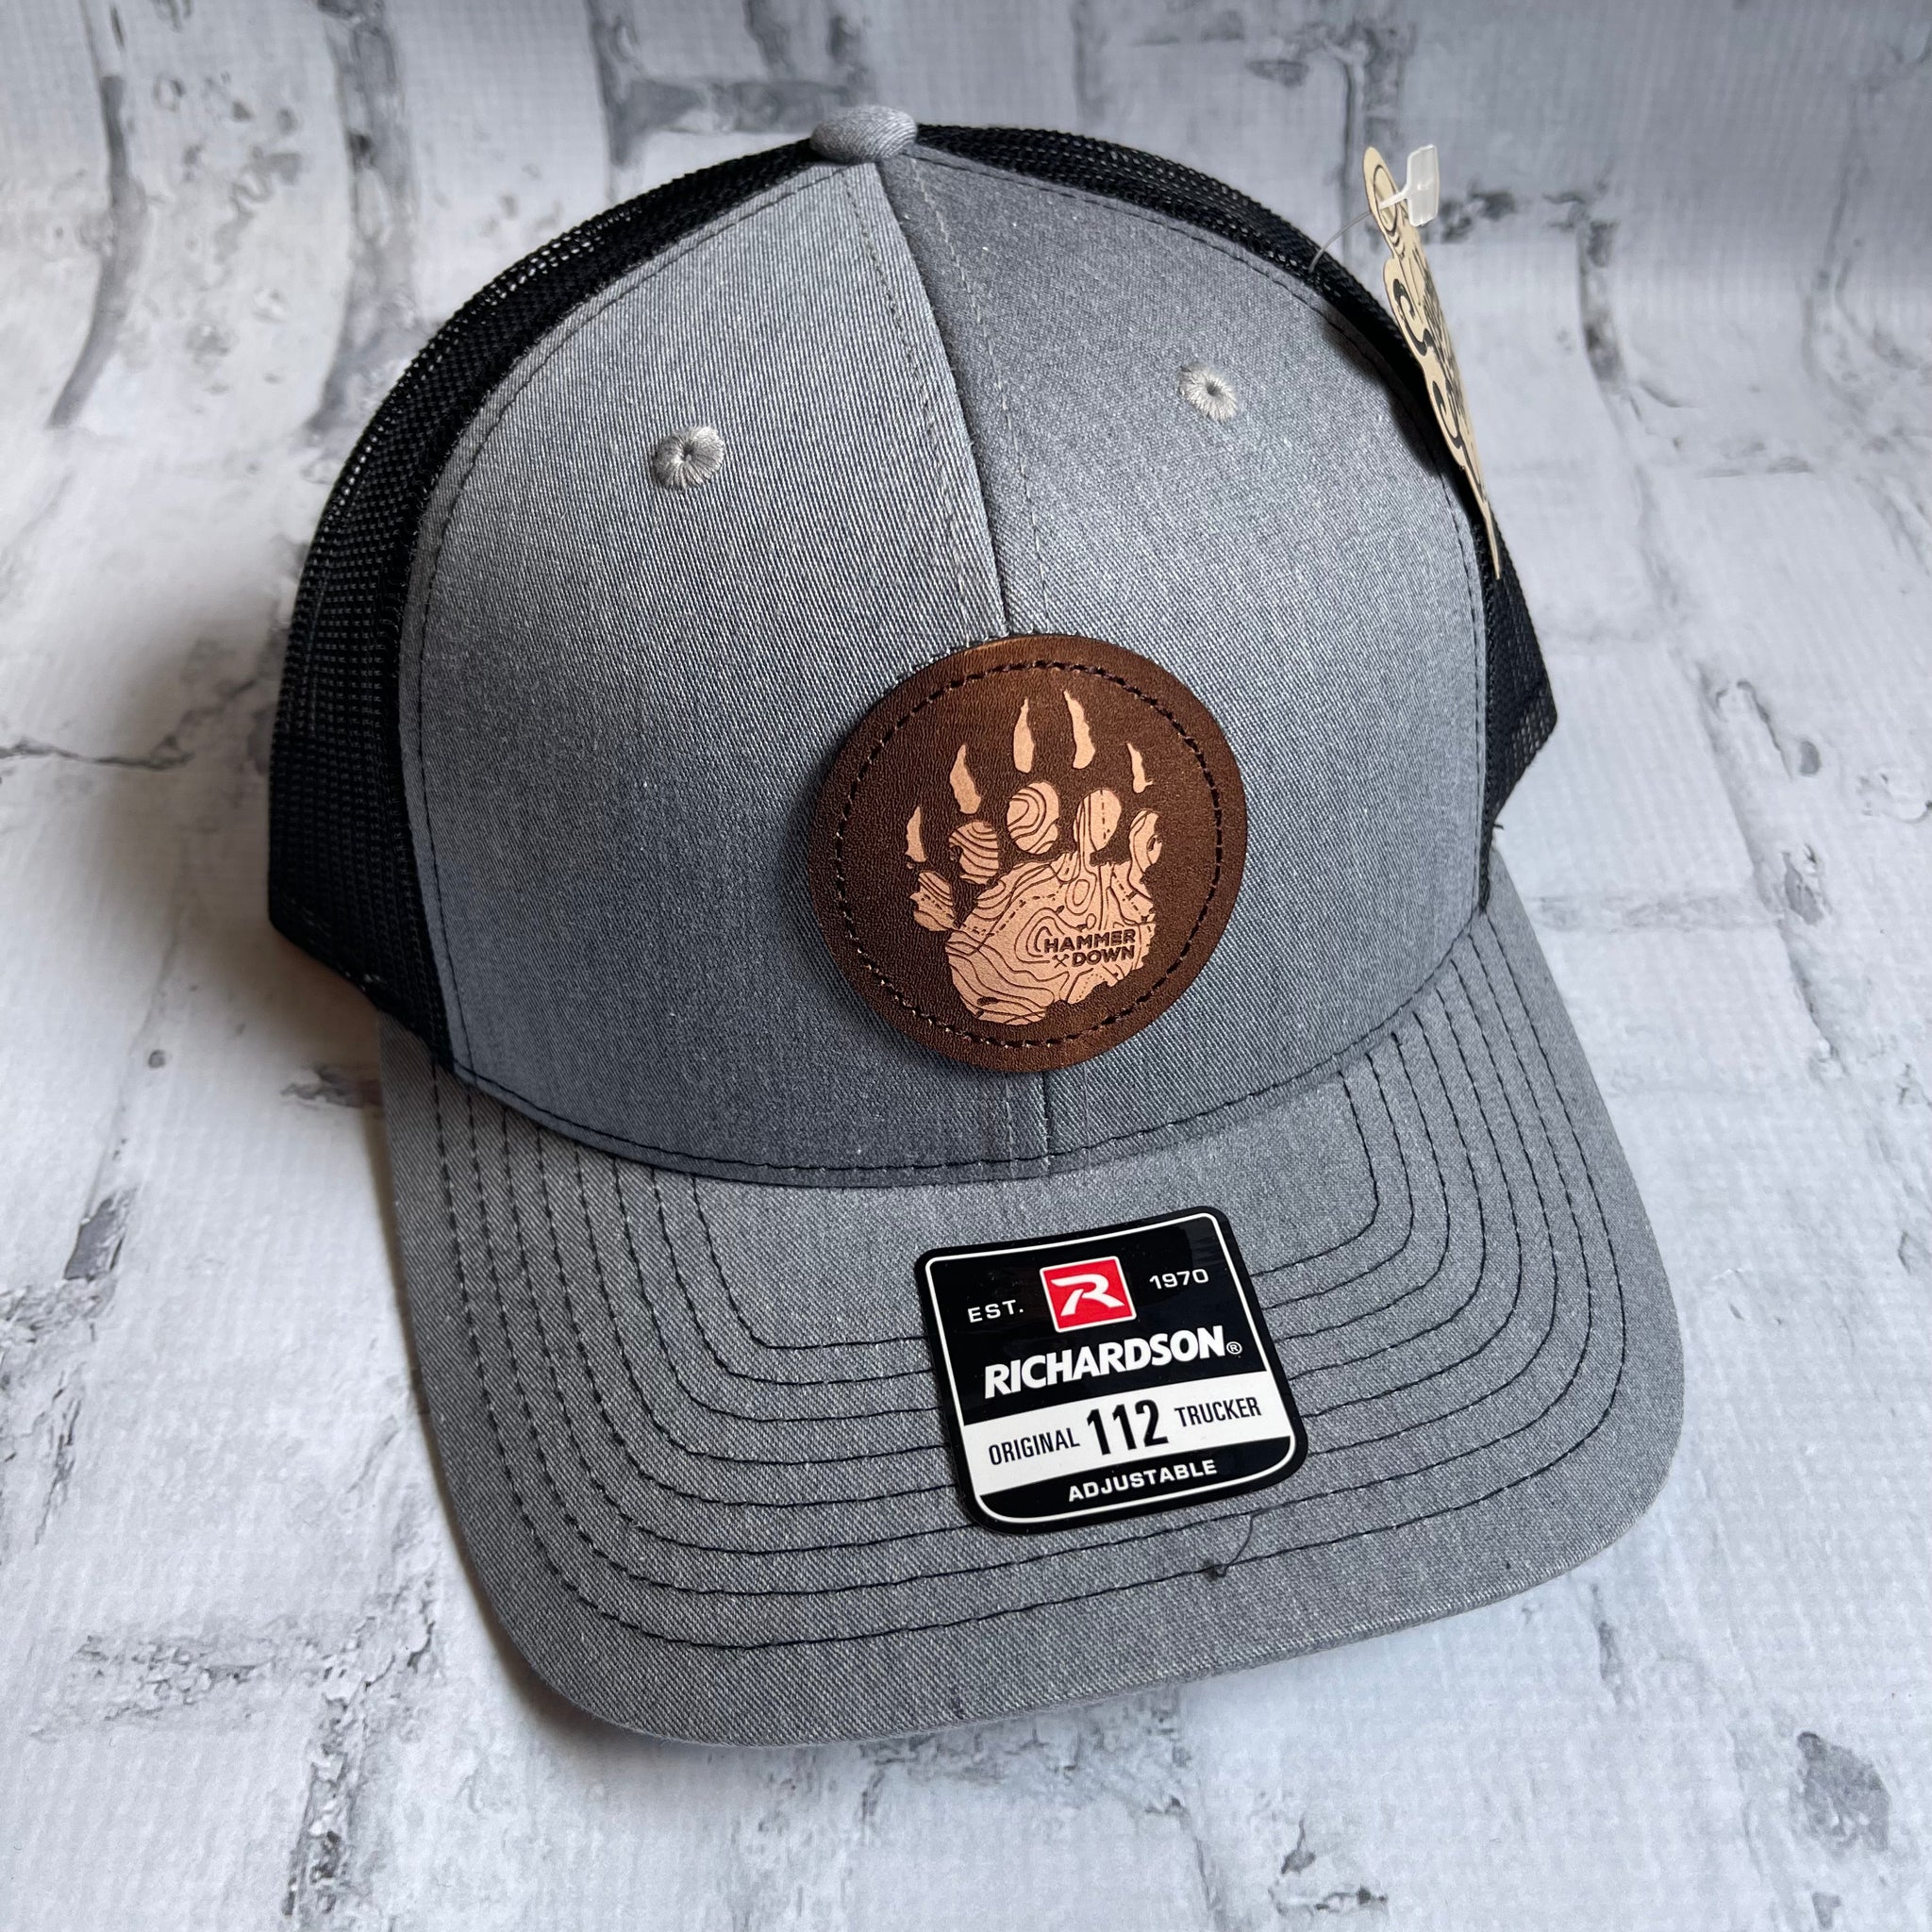 Hammer Down "Bear Claw Topo" Hat - Heather Gray with Leather Patch - Southern Charm "Shop The Charm"